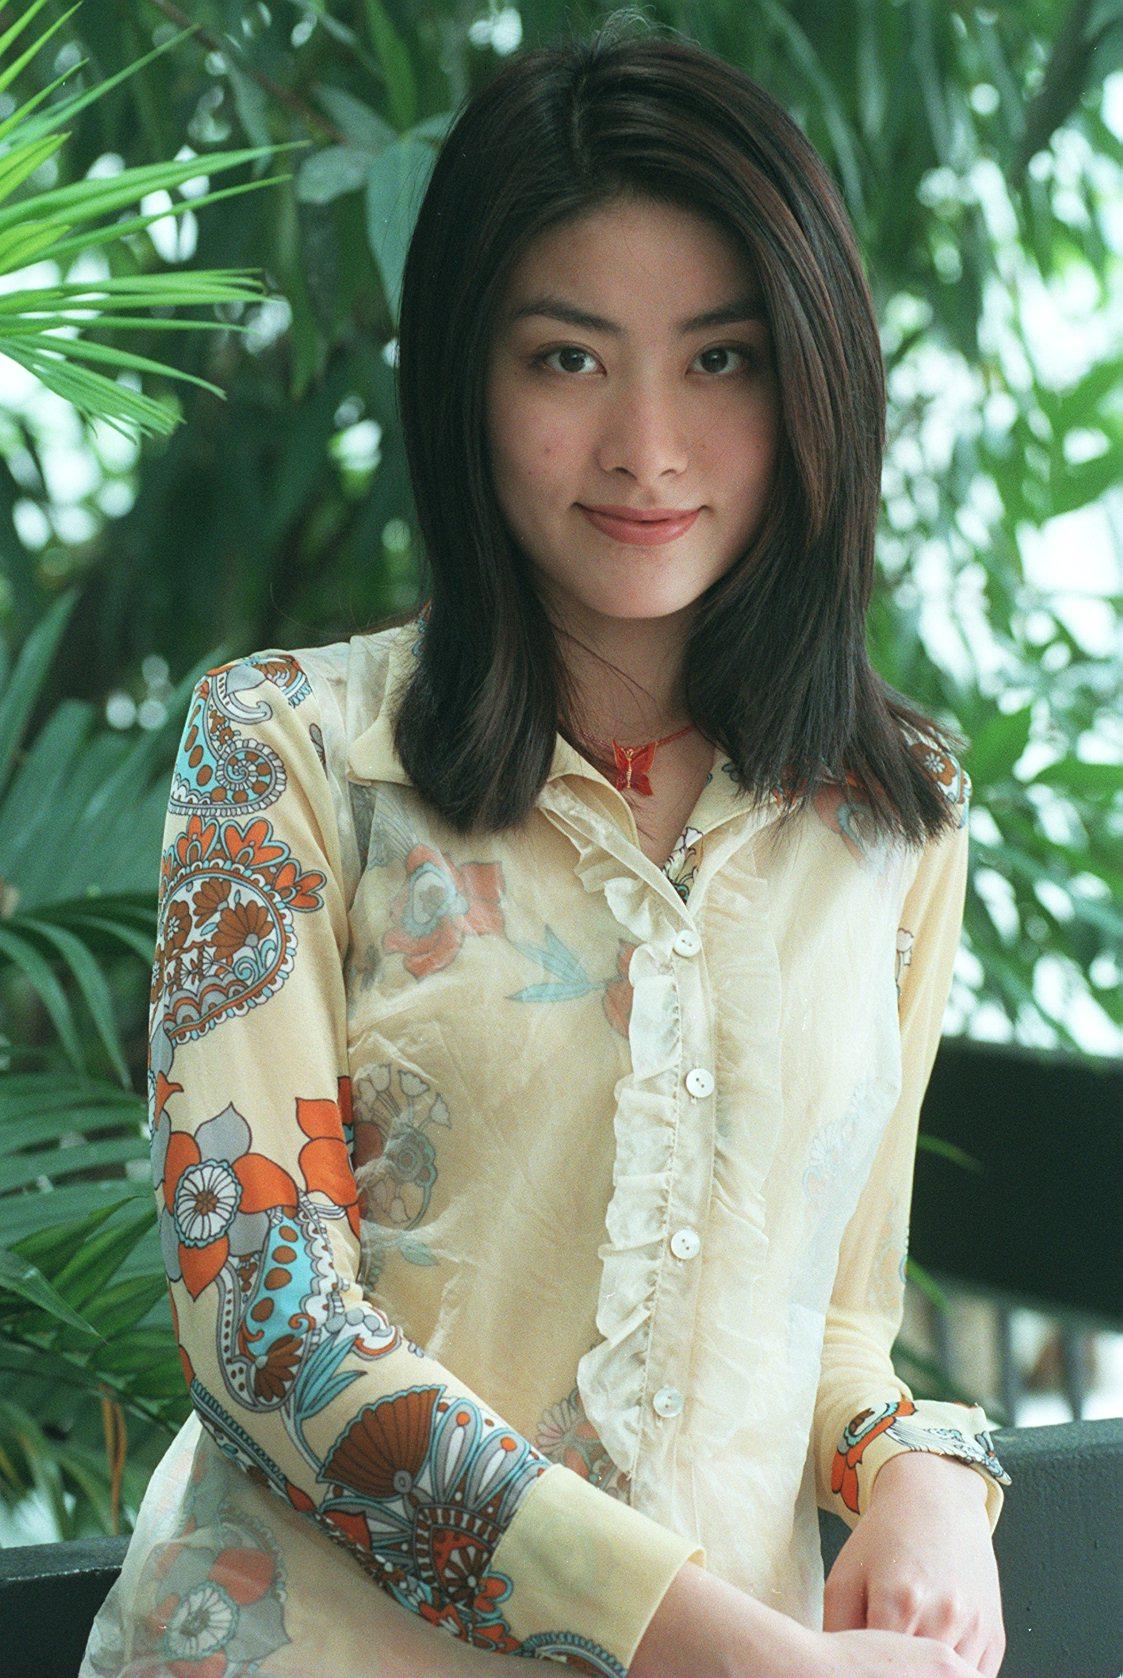 Kelly Chen pictured in 1997. The secret to the Cantopop star and actress’s success? “I’ve just tried my best to grab any opportunity.” Photo: Dickson Lee